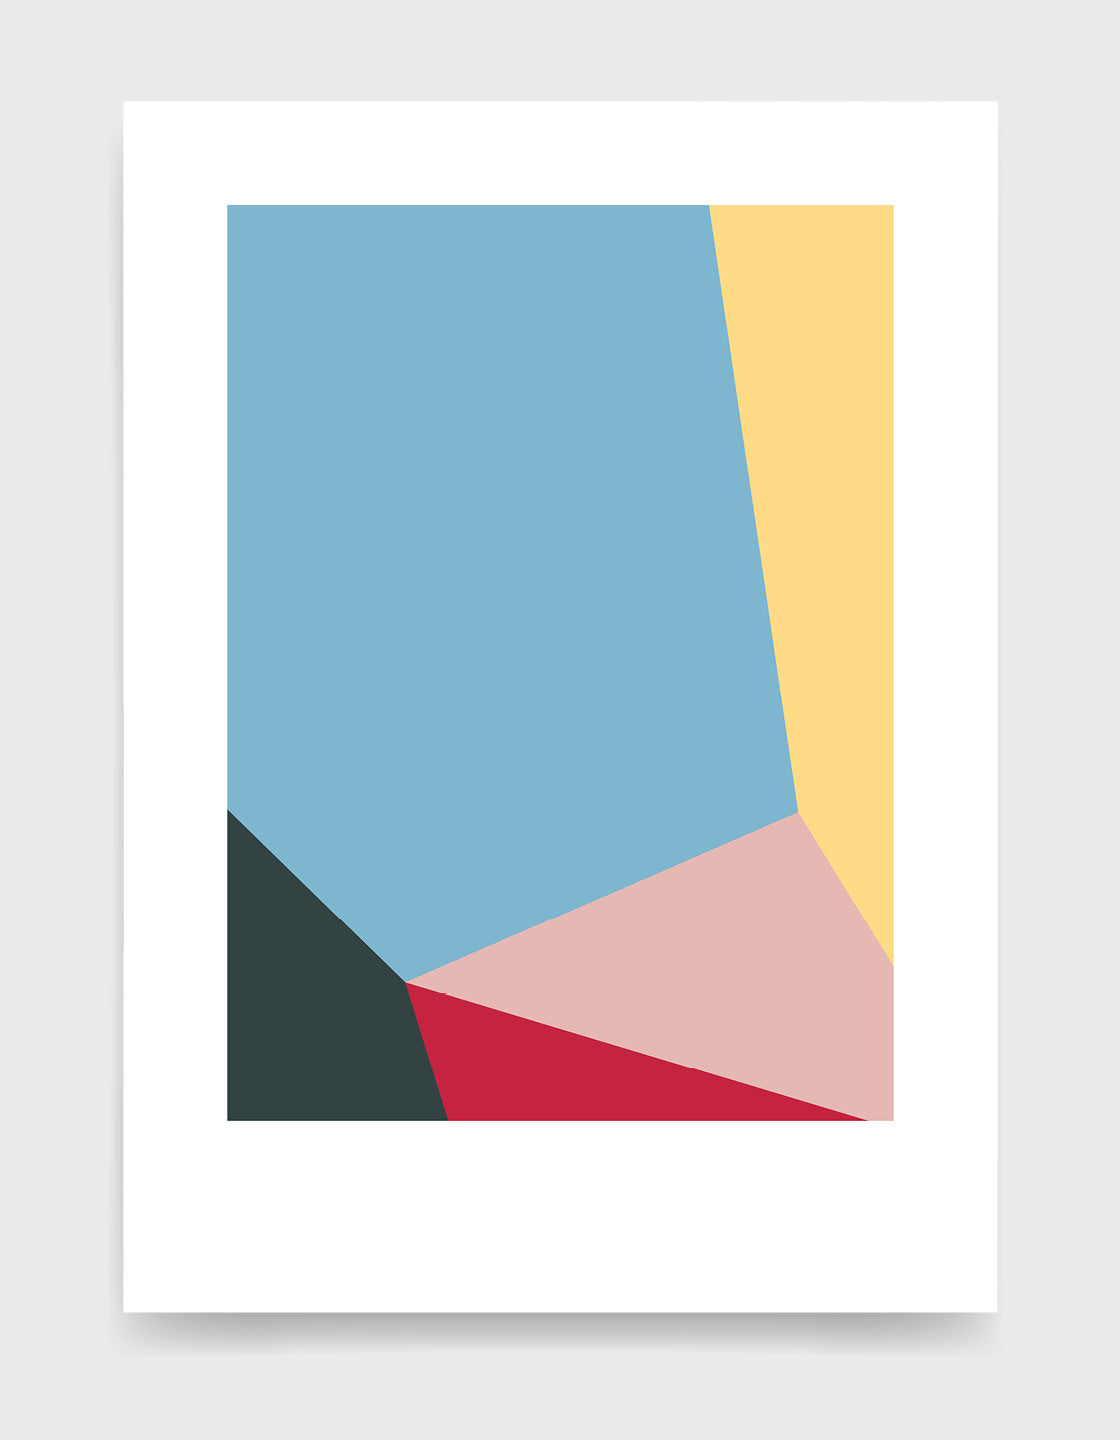 Modern minimal abstract art prints for a gallery wall